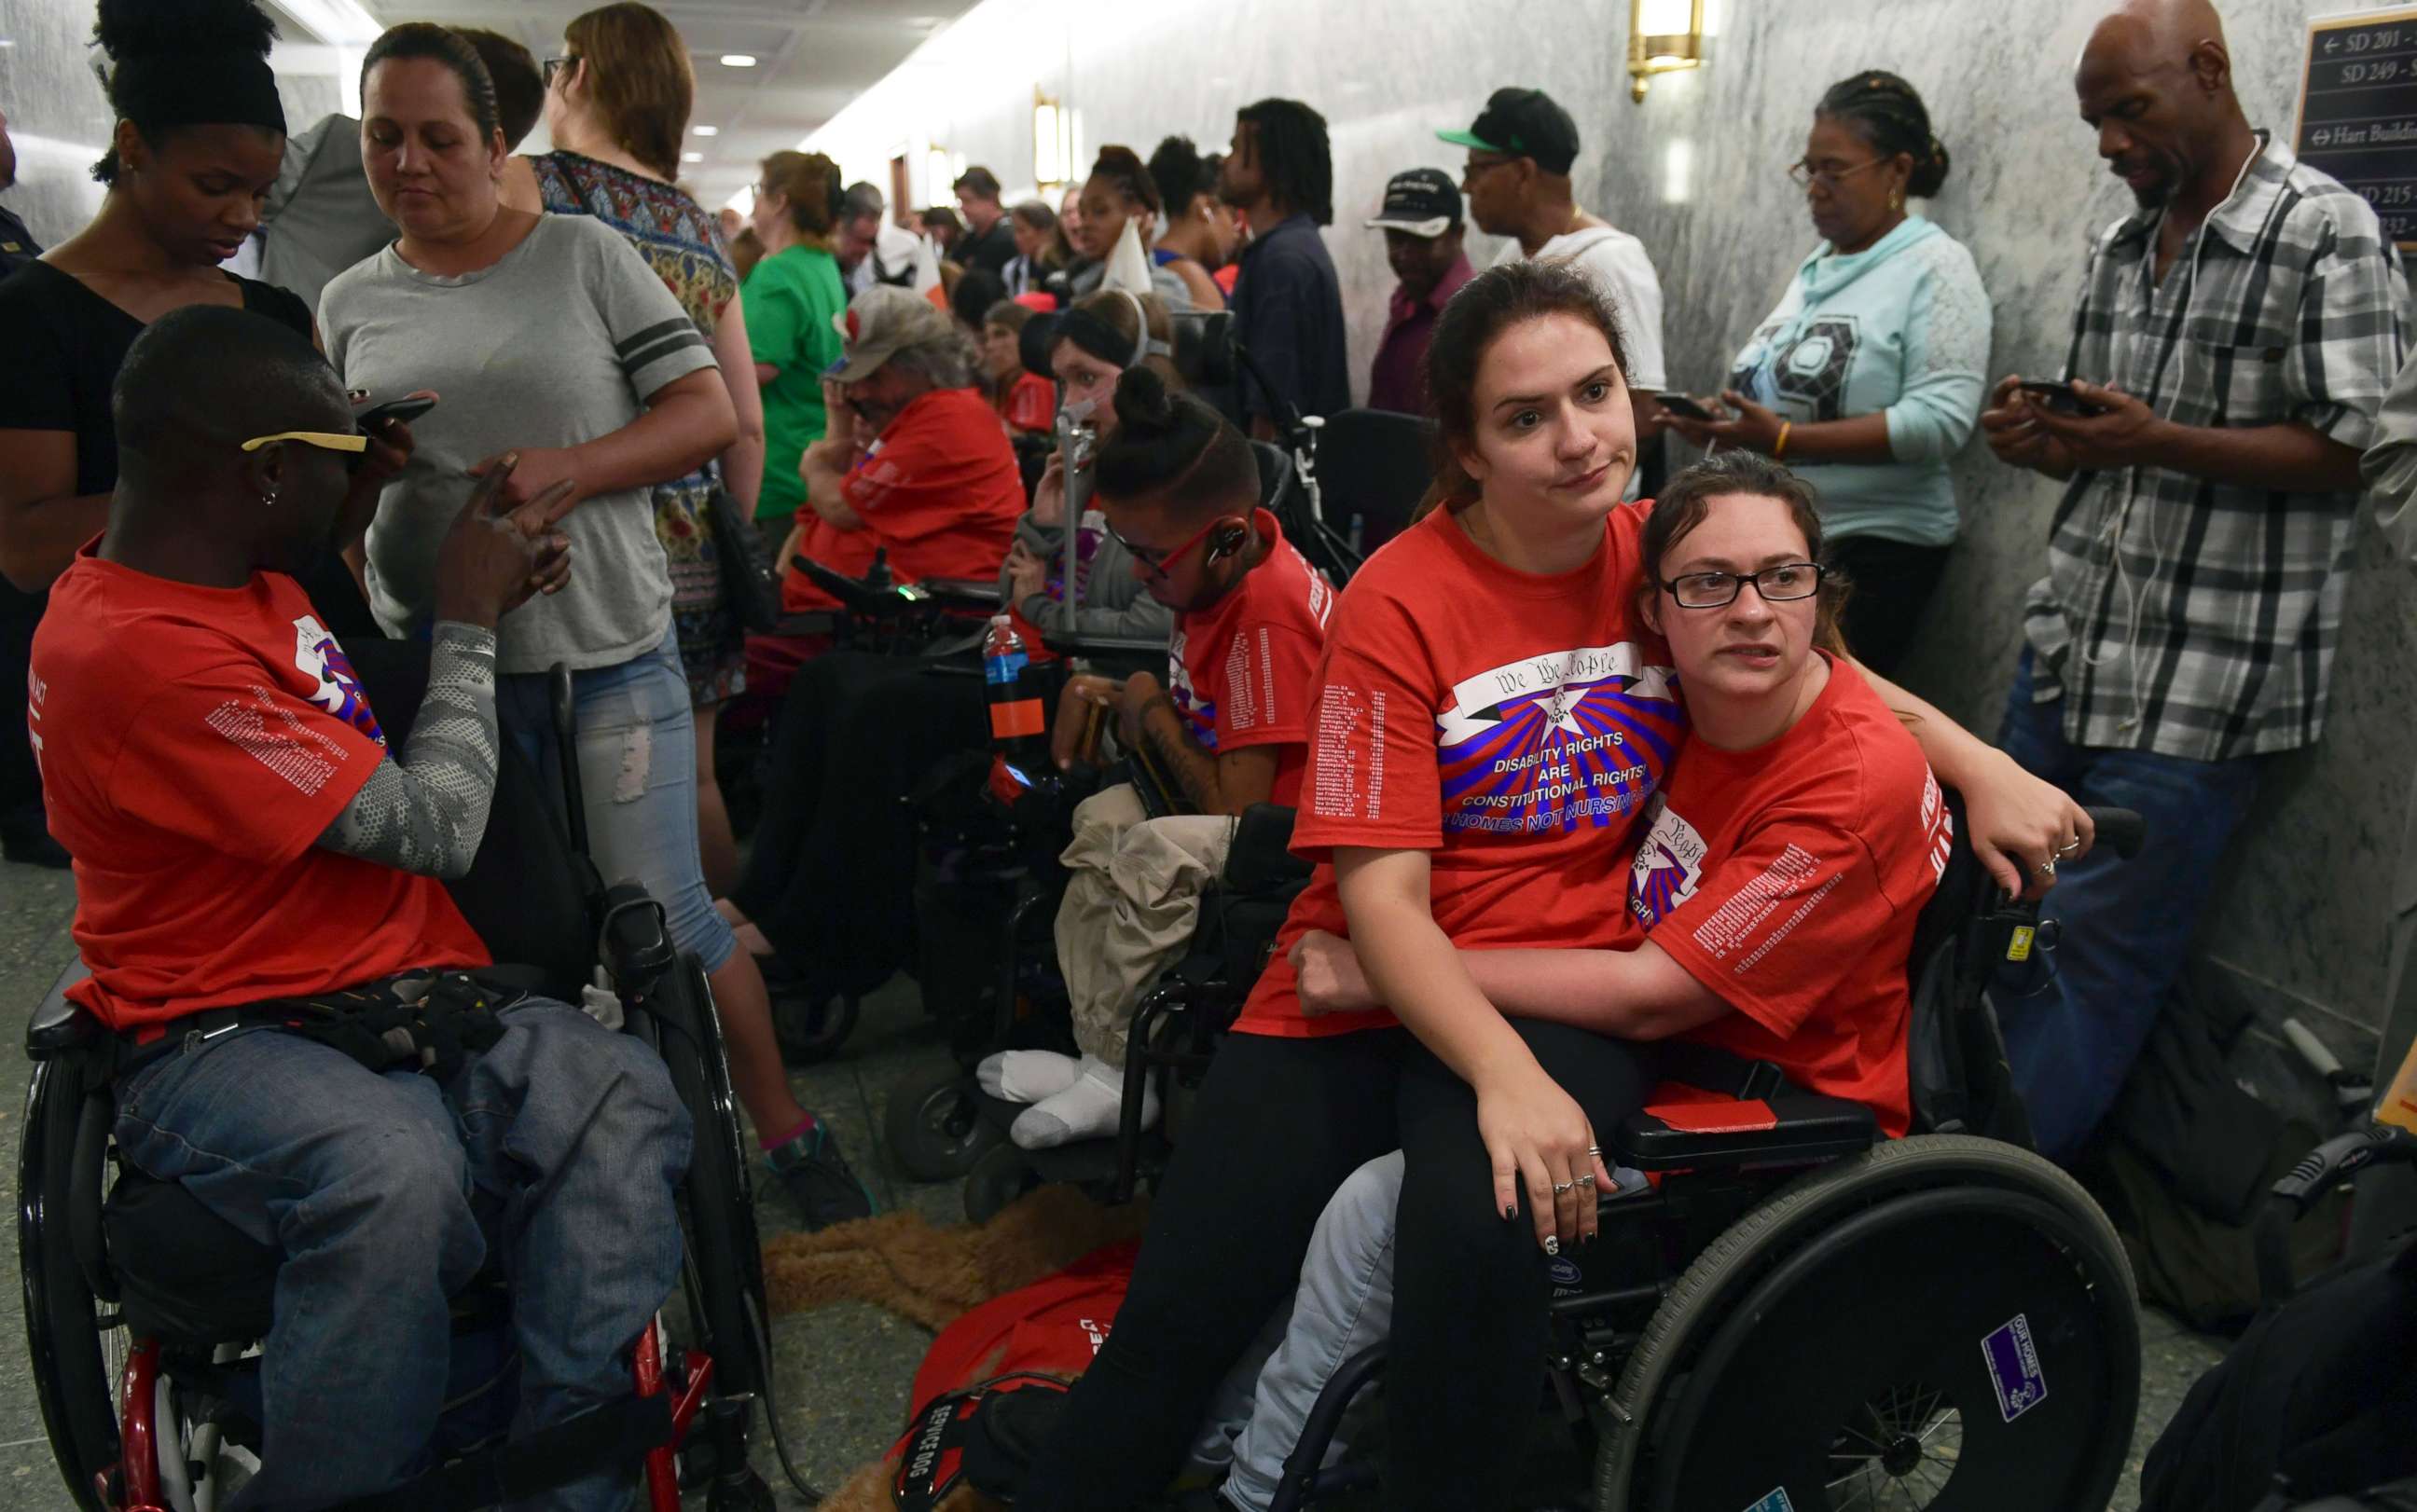 PHOTO: Shaylin Sluzalis, sits with her sister Brinnani Sluzalis, both of Williamsport, Pa., as they rally prior to a hearing by the Senate Finance Committee on the Graham-Cassidy health care repeal, in Washington, Sept. 25, 2017. 